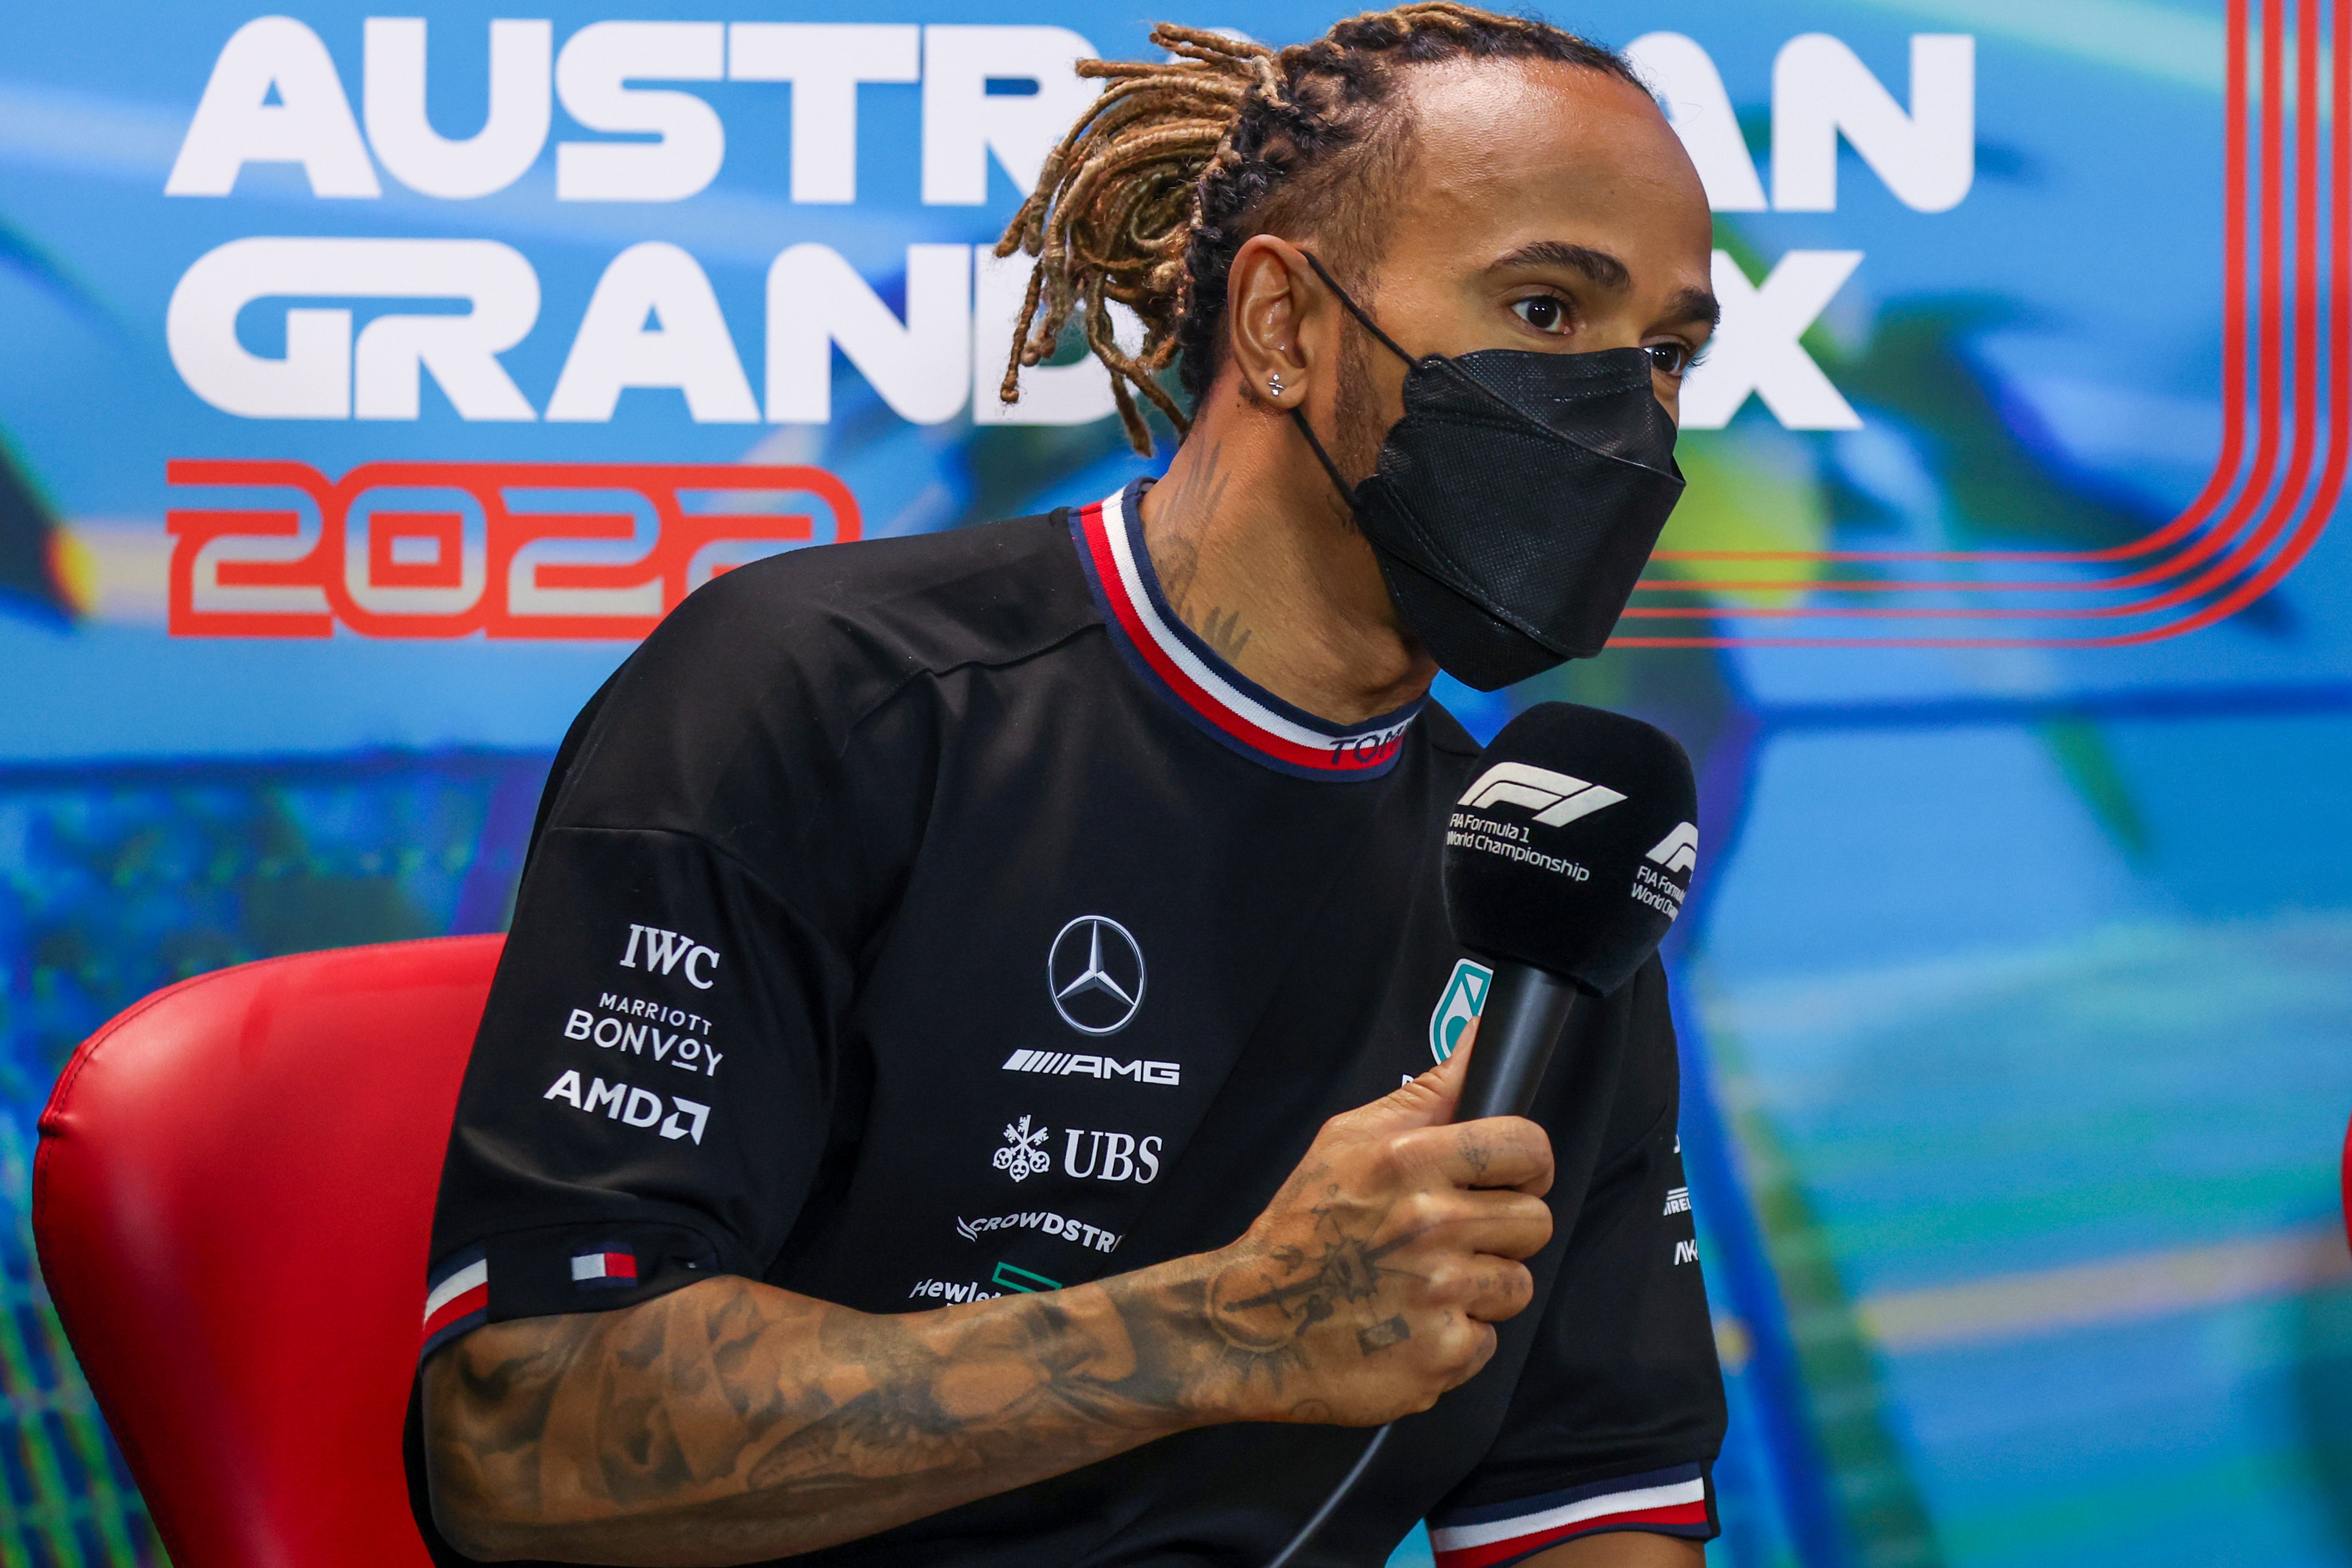 Hamilton is hopeful Mercedes can challenge for the title this season